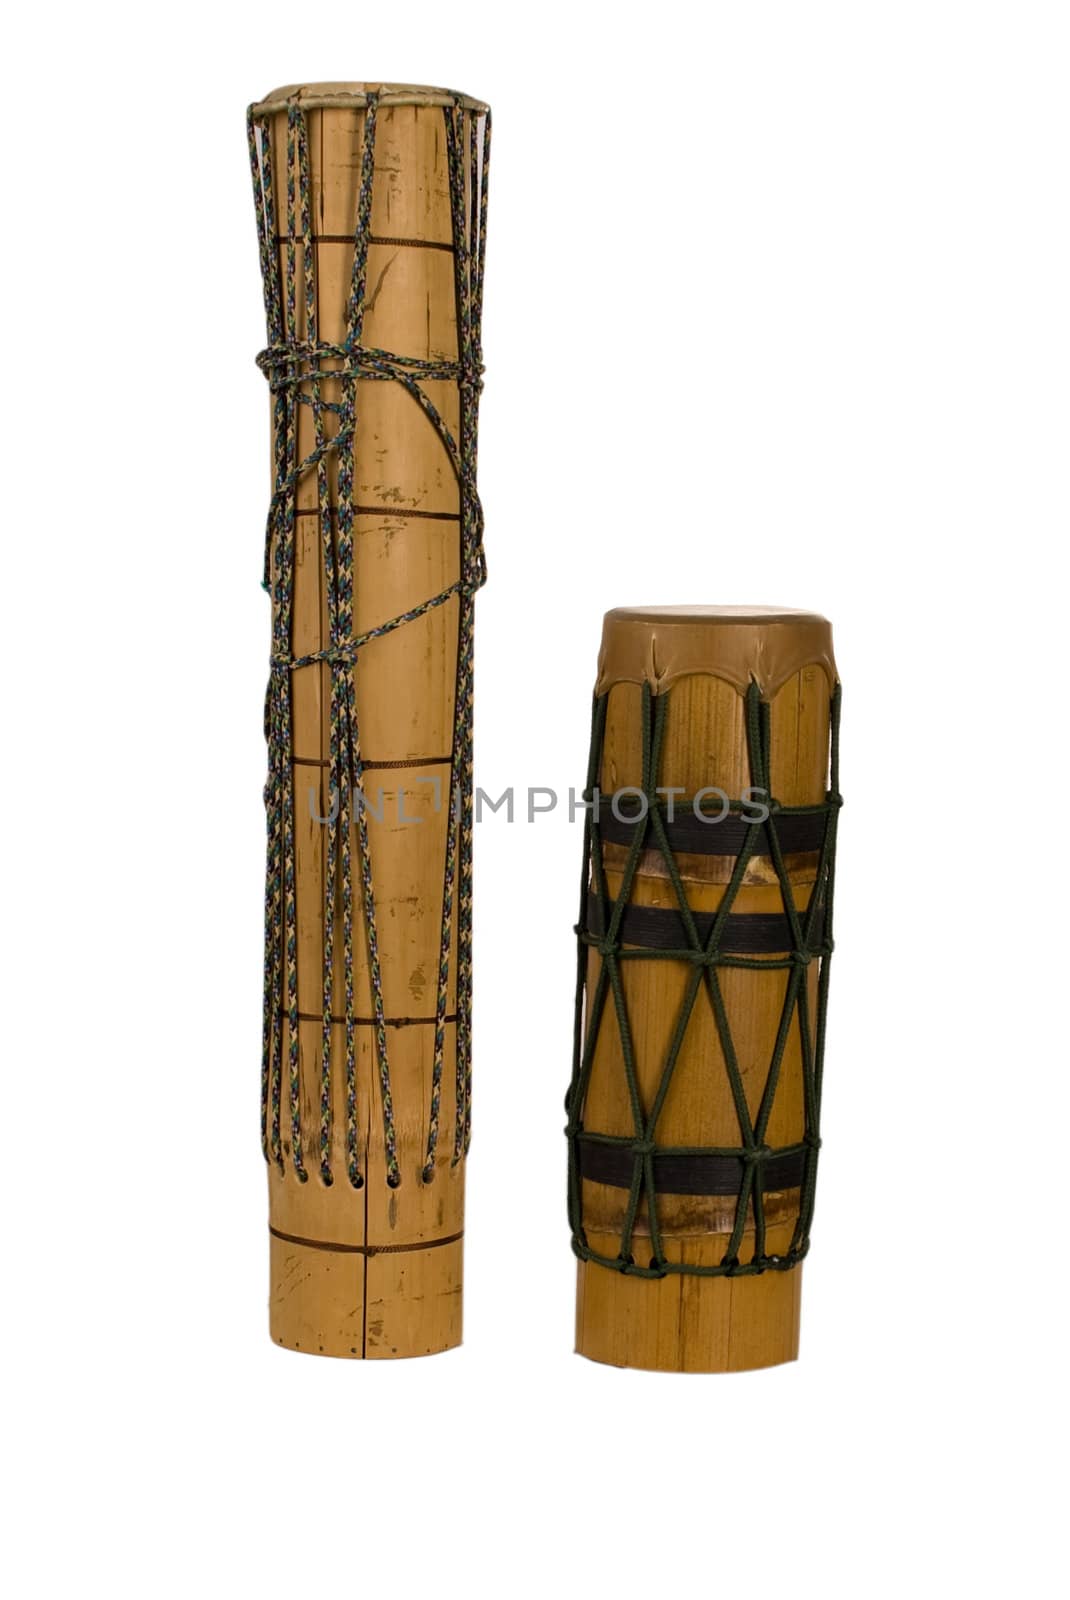 group of wooden exotic african drums isolated on white background